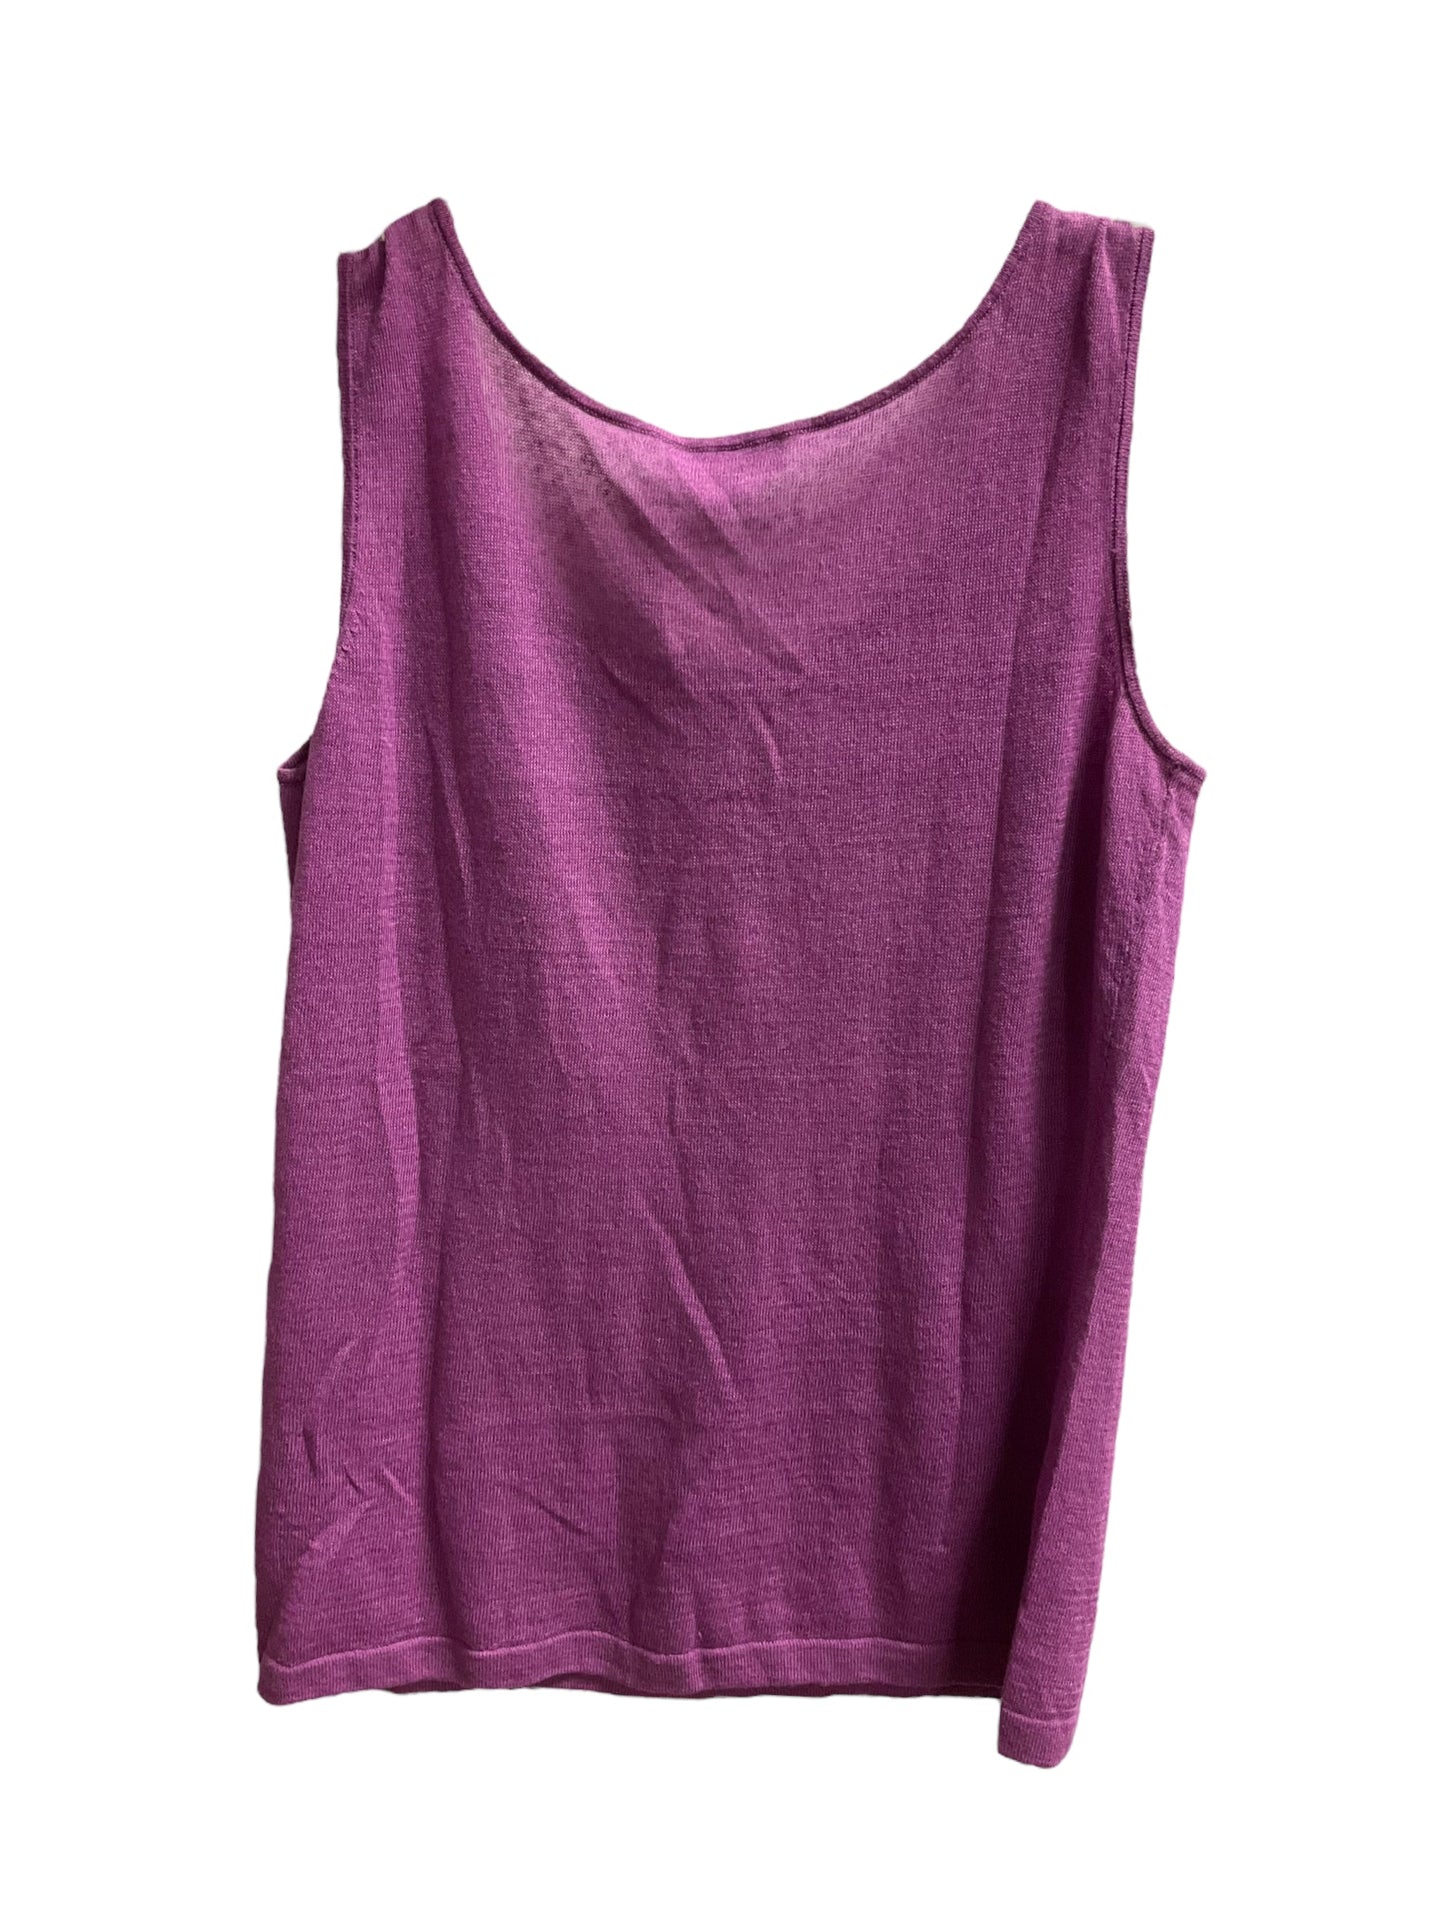 Top Sleeveless Designer By Lafayette 148  Size: S